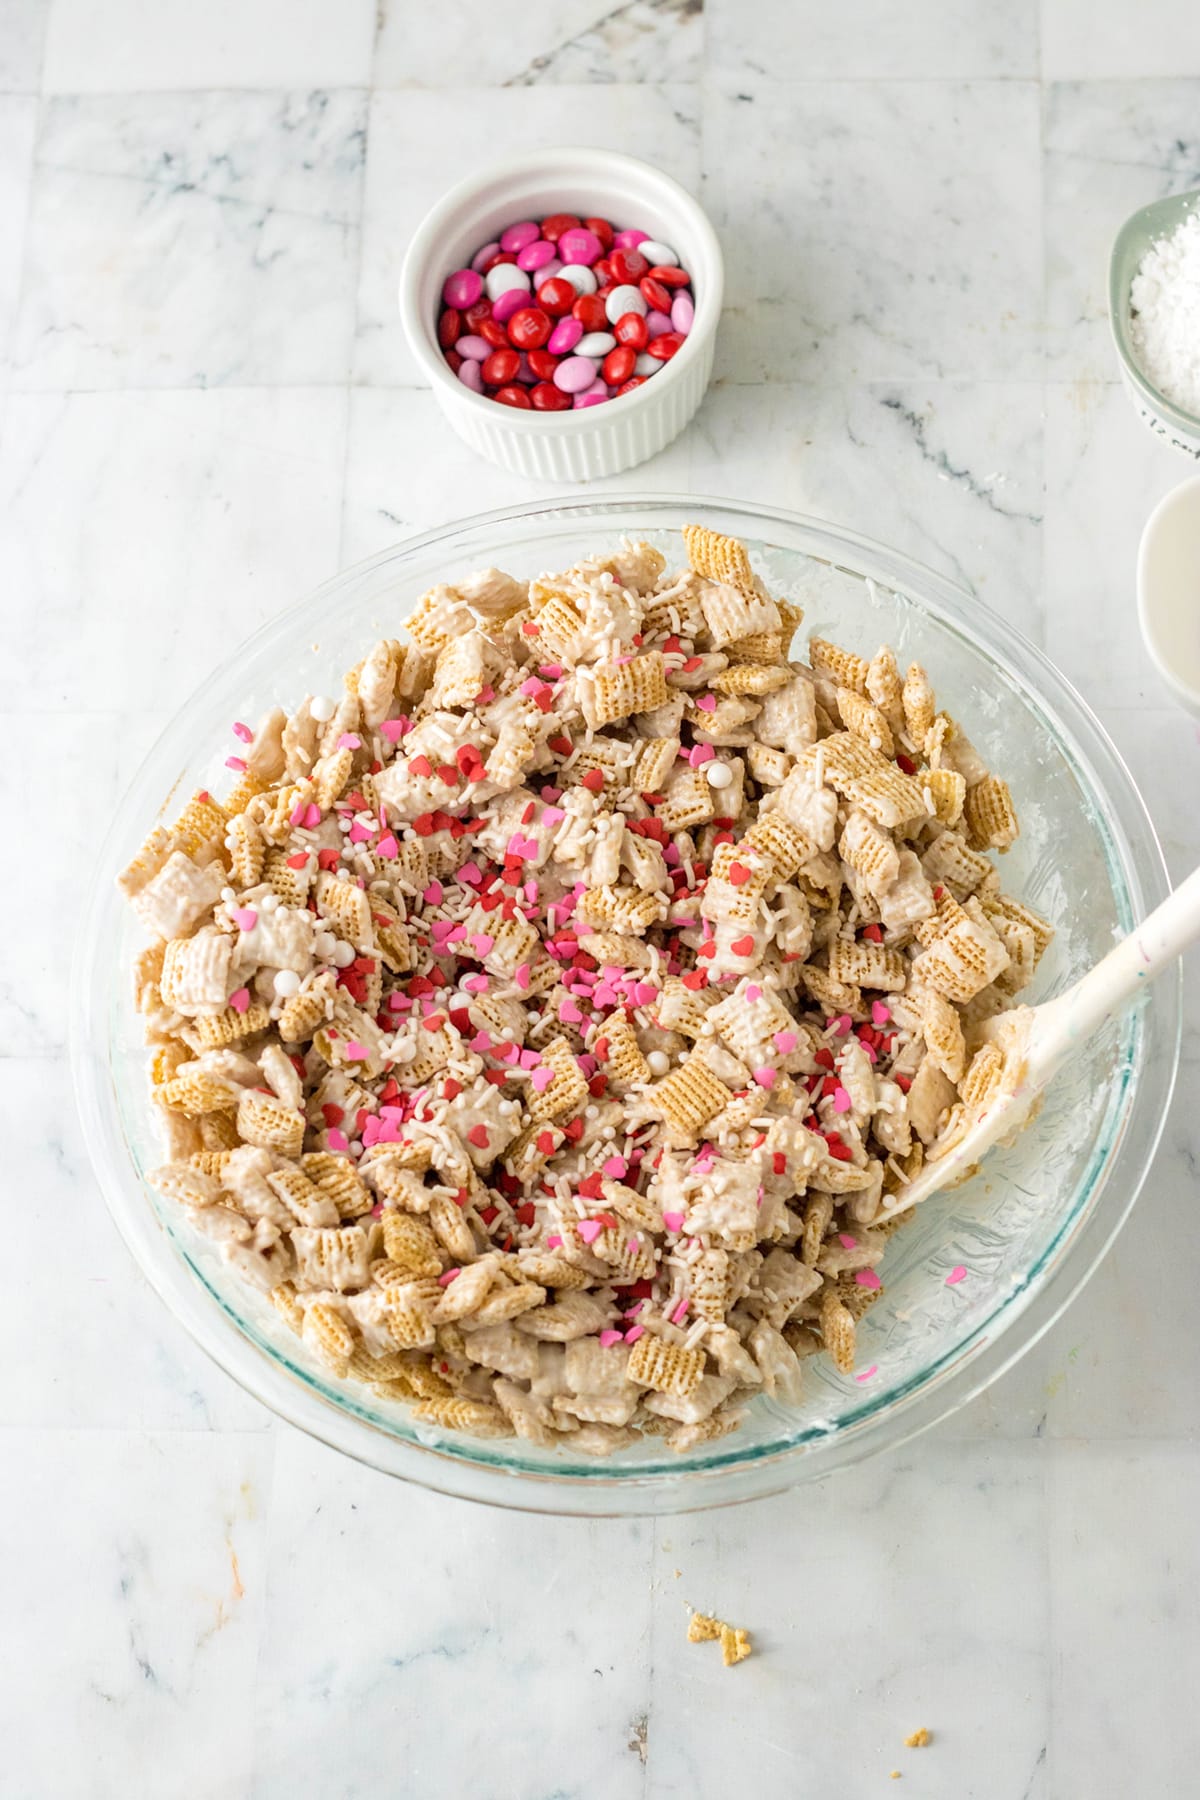 Mixing of cereal mixture and candy sprinkles in a glass bowl